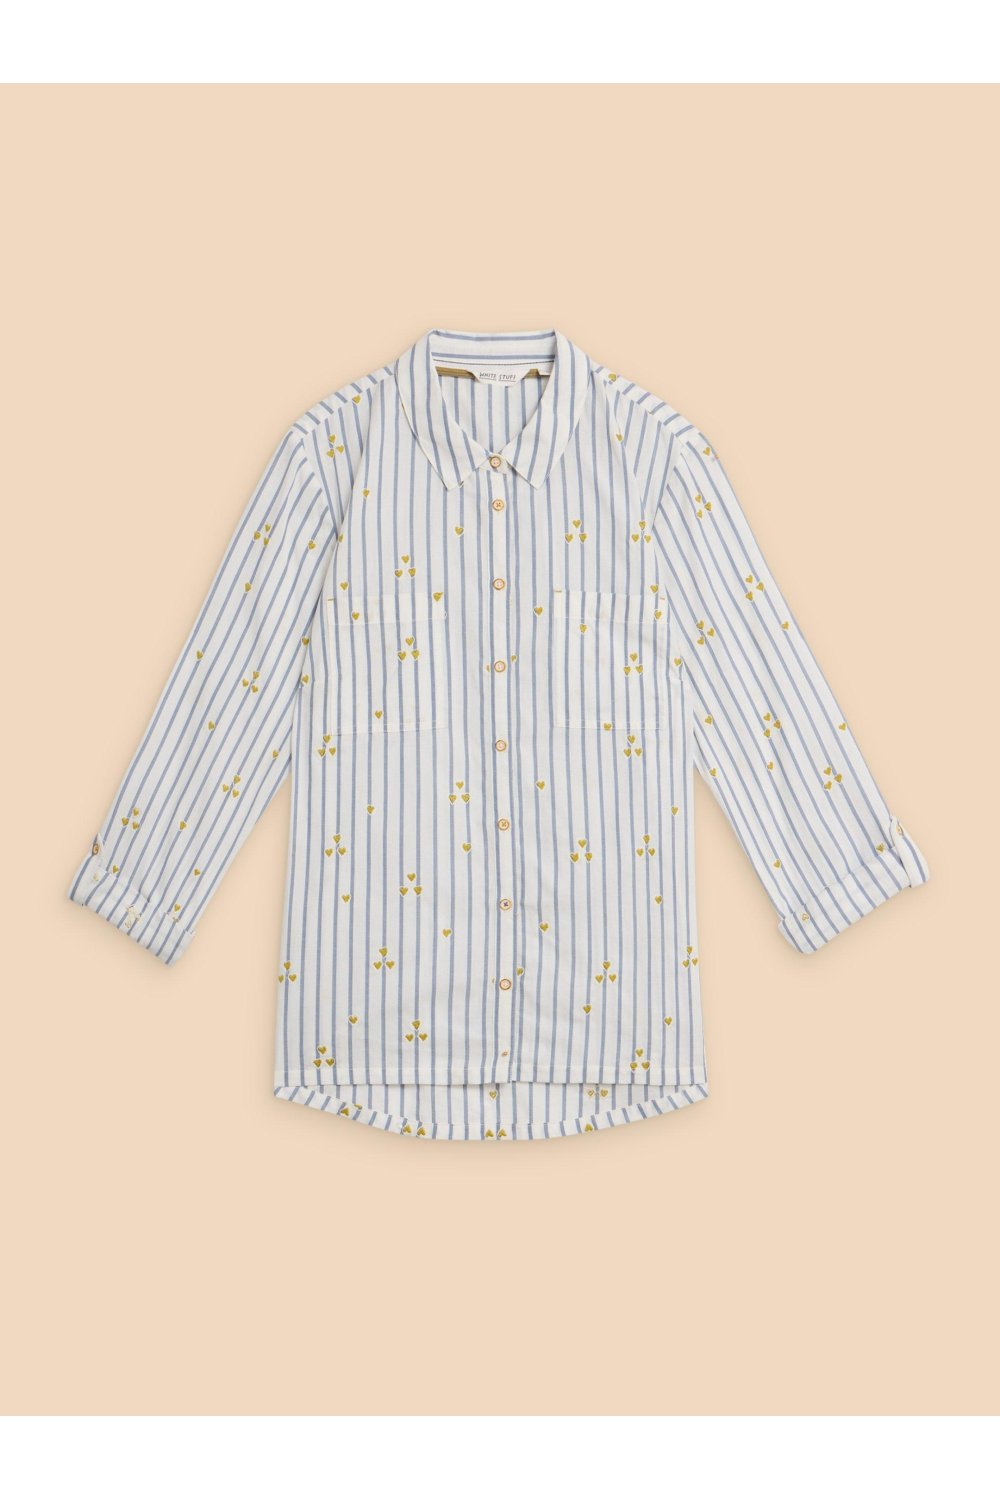 White Stuff Sophie Embroidered Shirt